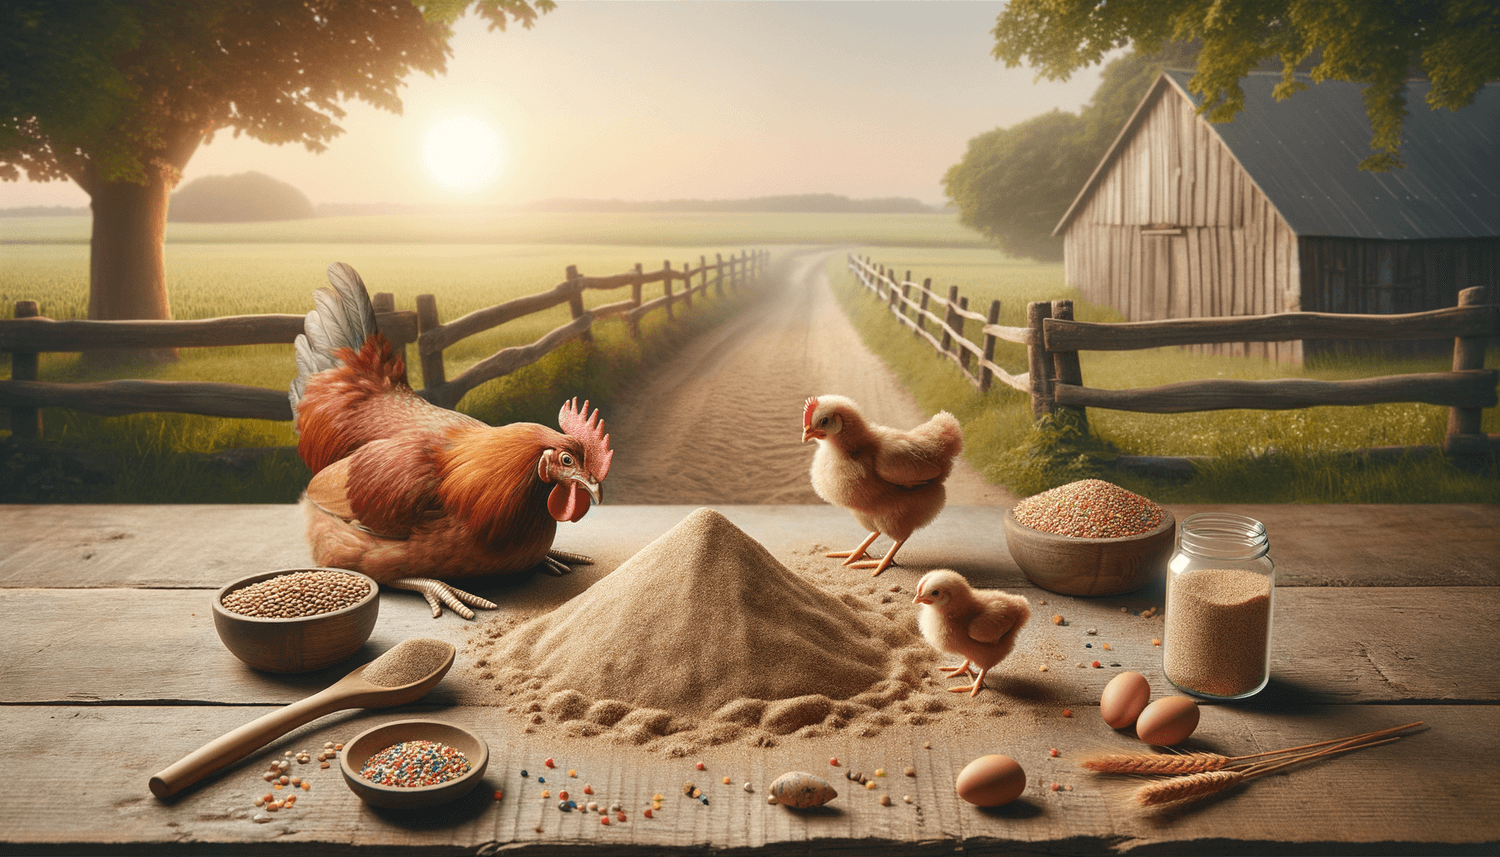 Can Chickens Eat Sand?